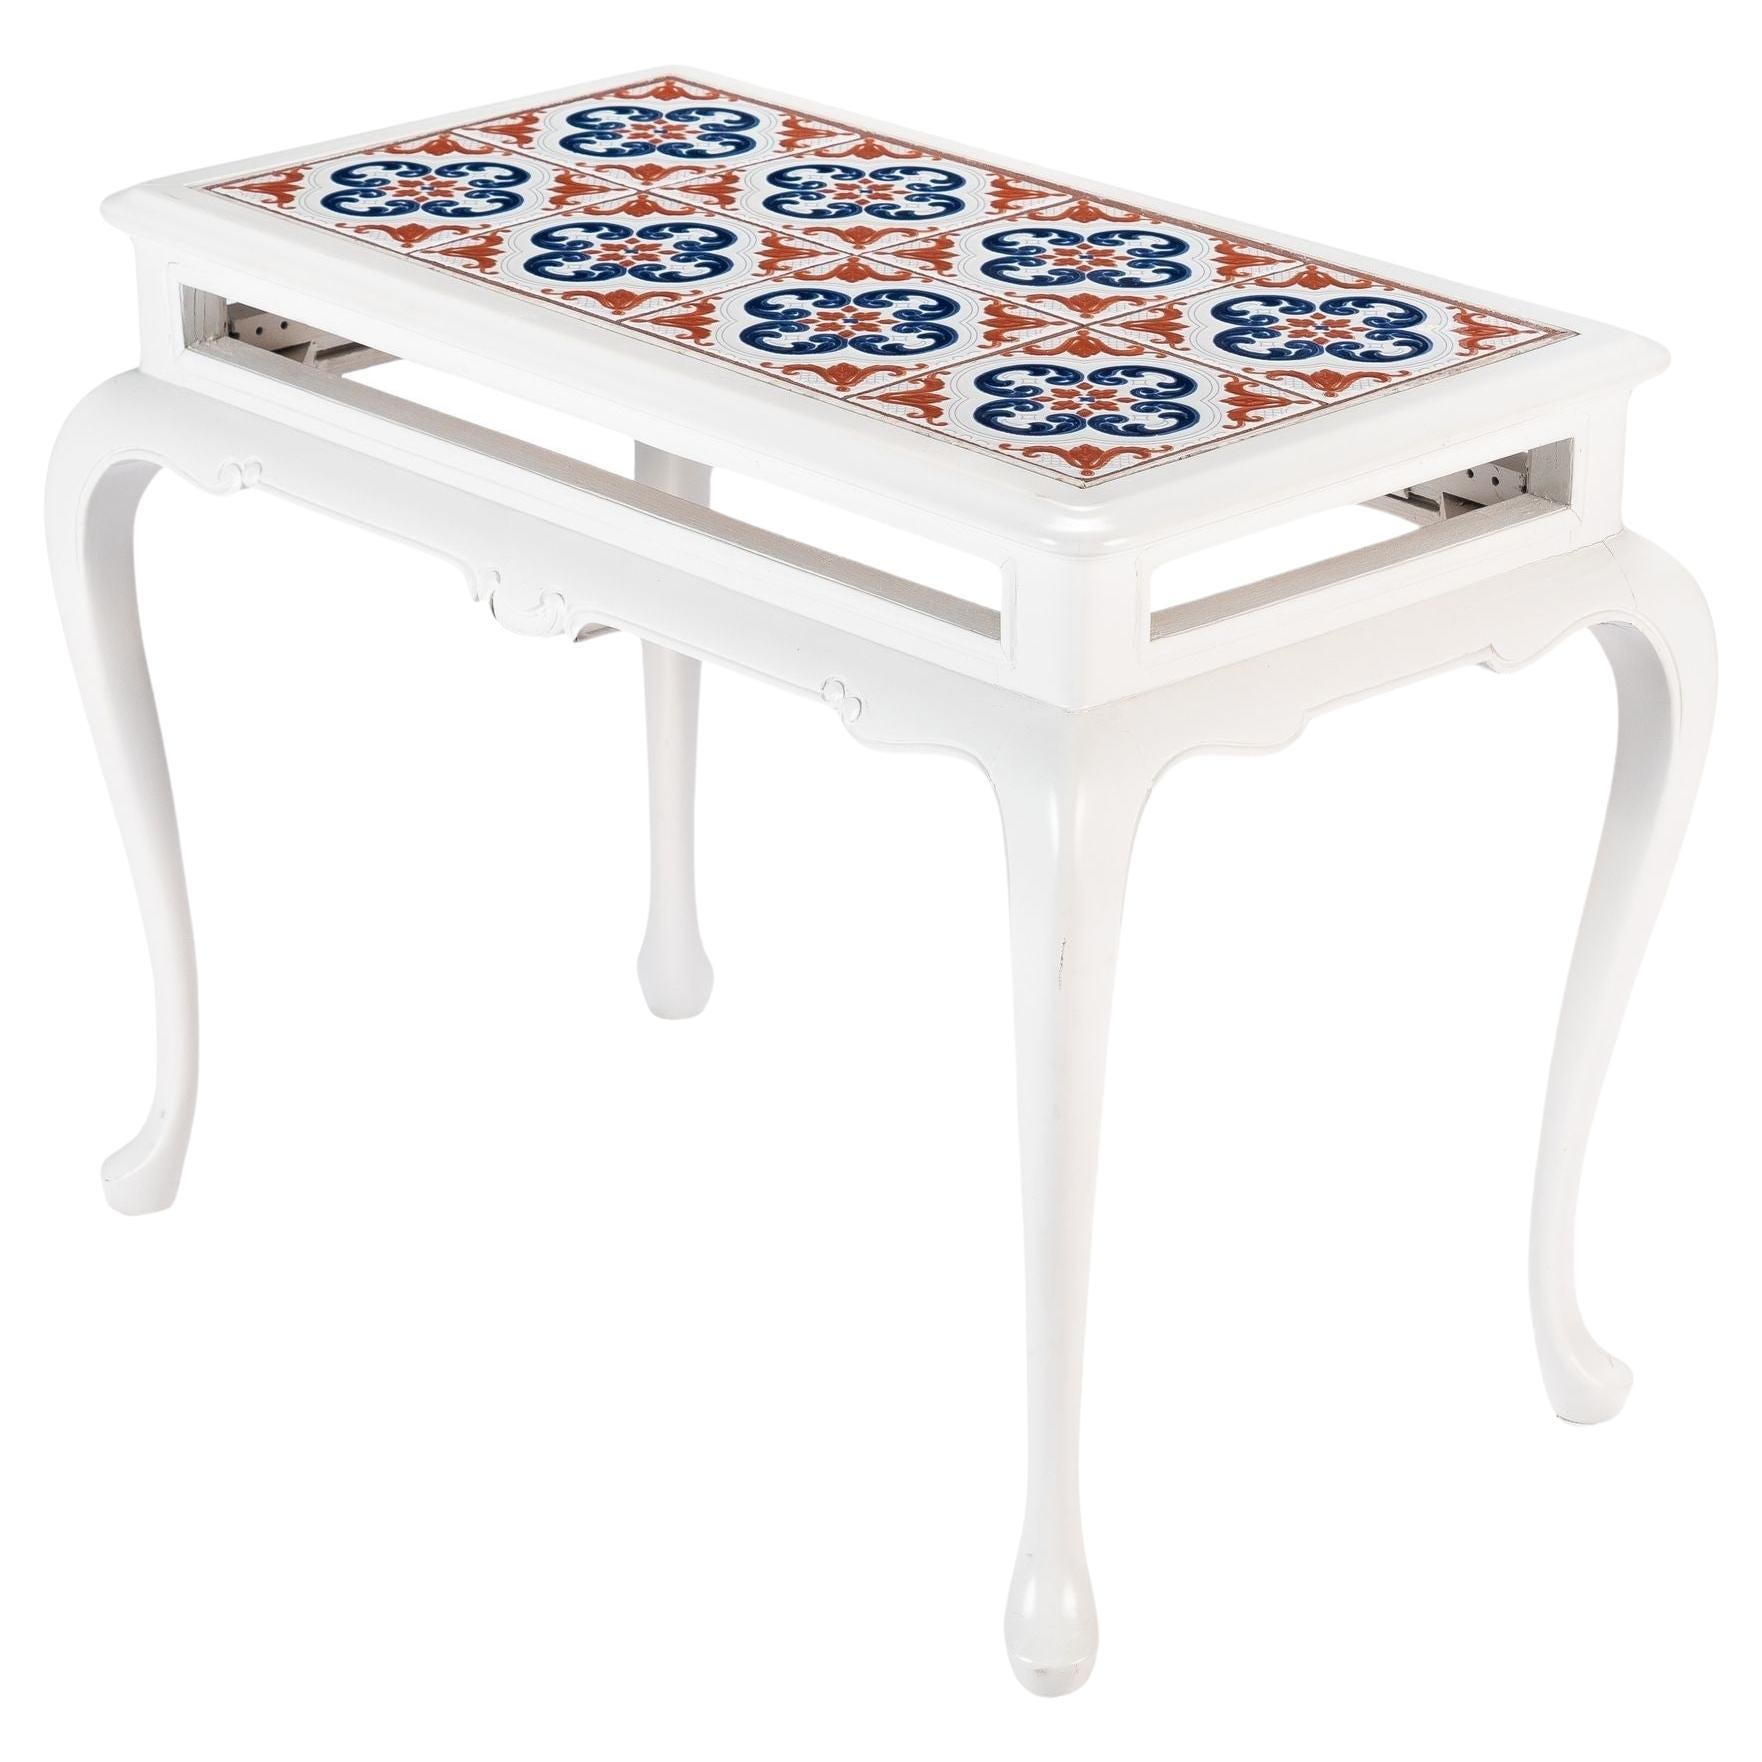 Painted Queen Anne style hardwood tiled coffee table, 1950's